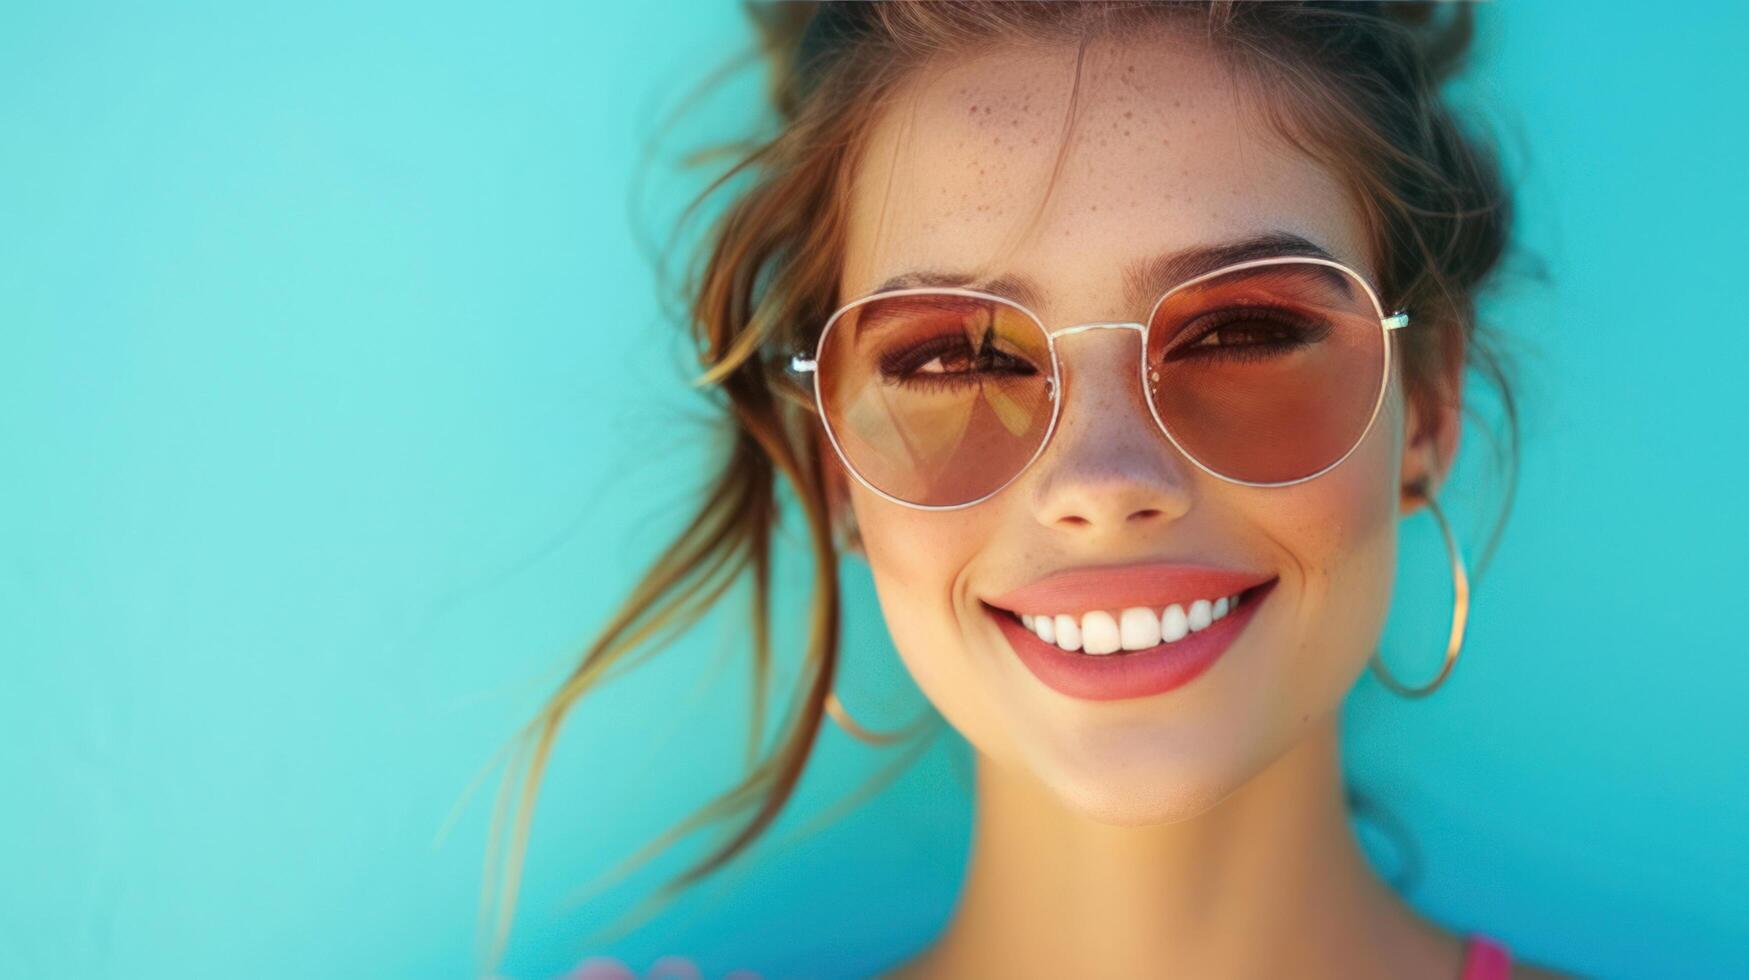 AI generated A close-up photograph of a fashionable young woman wearing sunglasses, smiling in front of a blue background photo